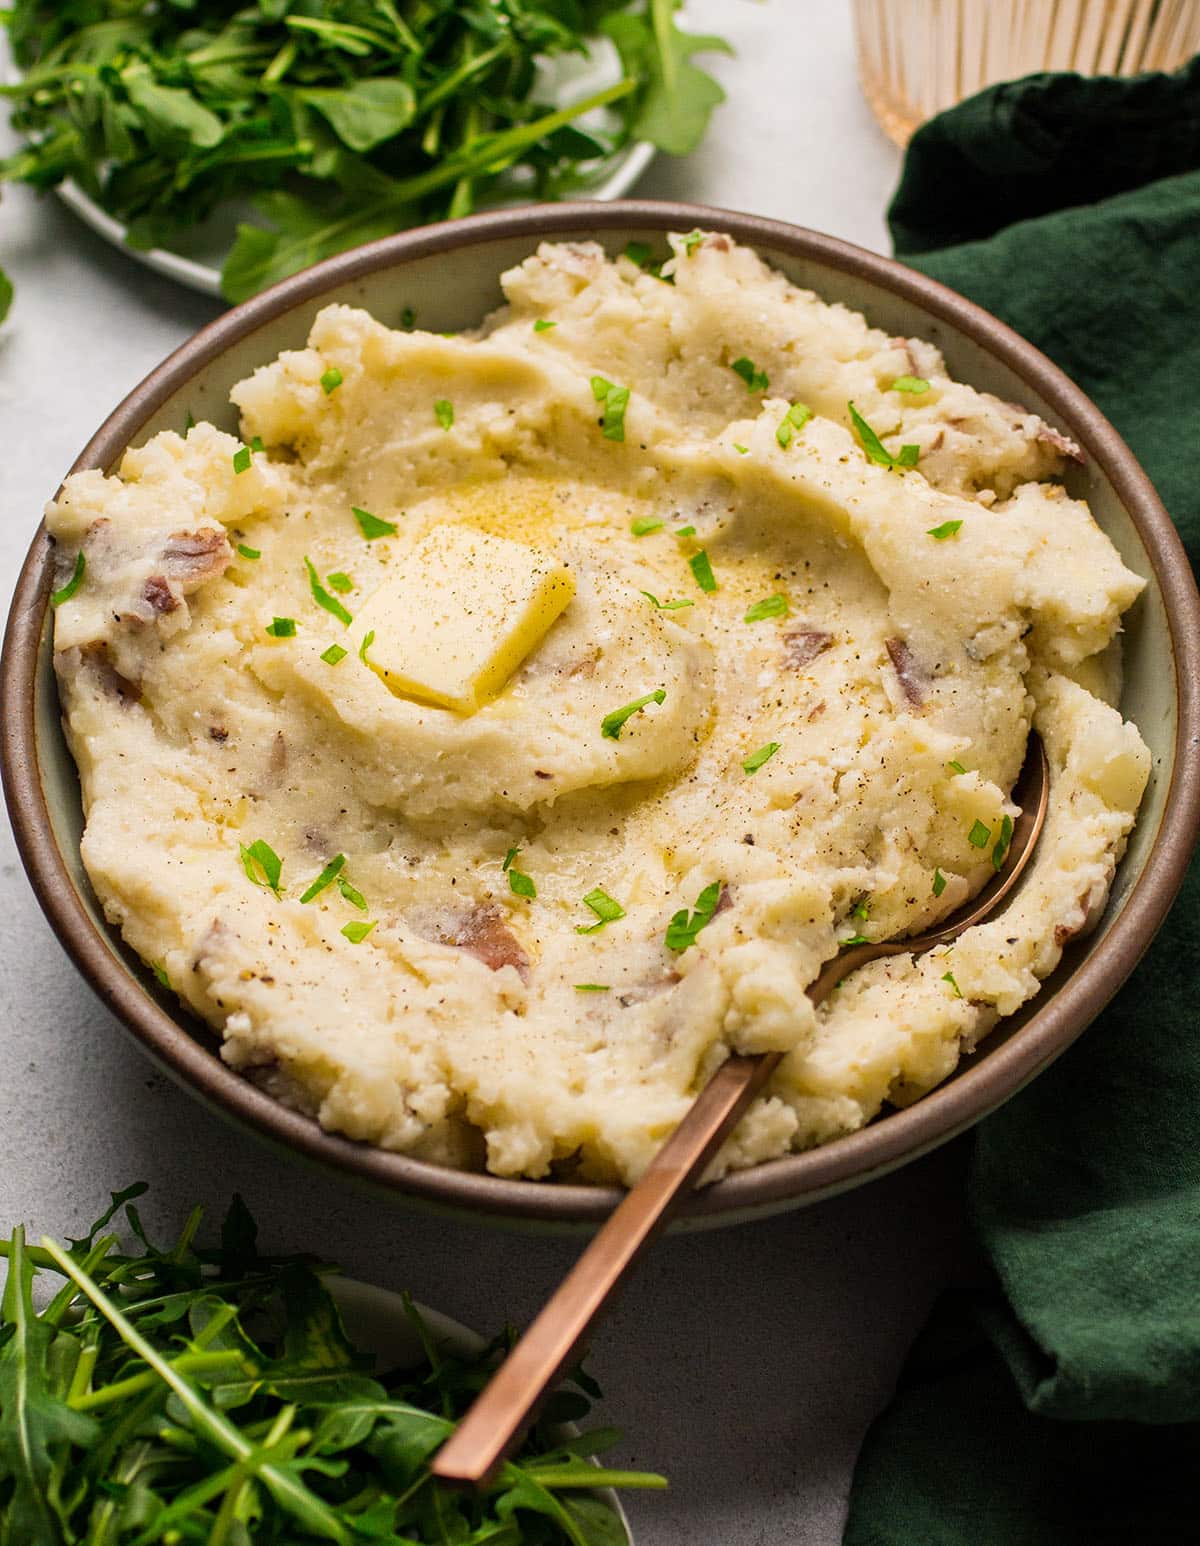 White cheddar potatoes in a shallow bowl with a copper spoon.